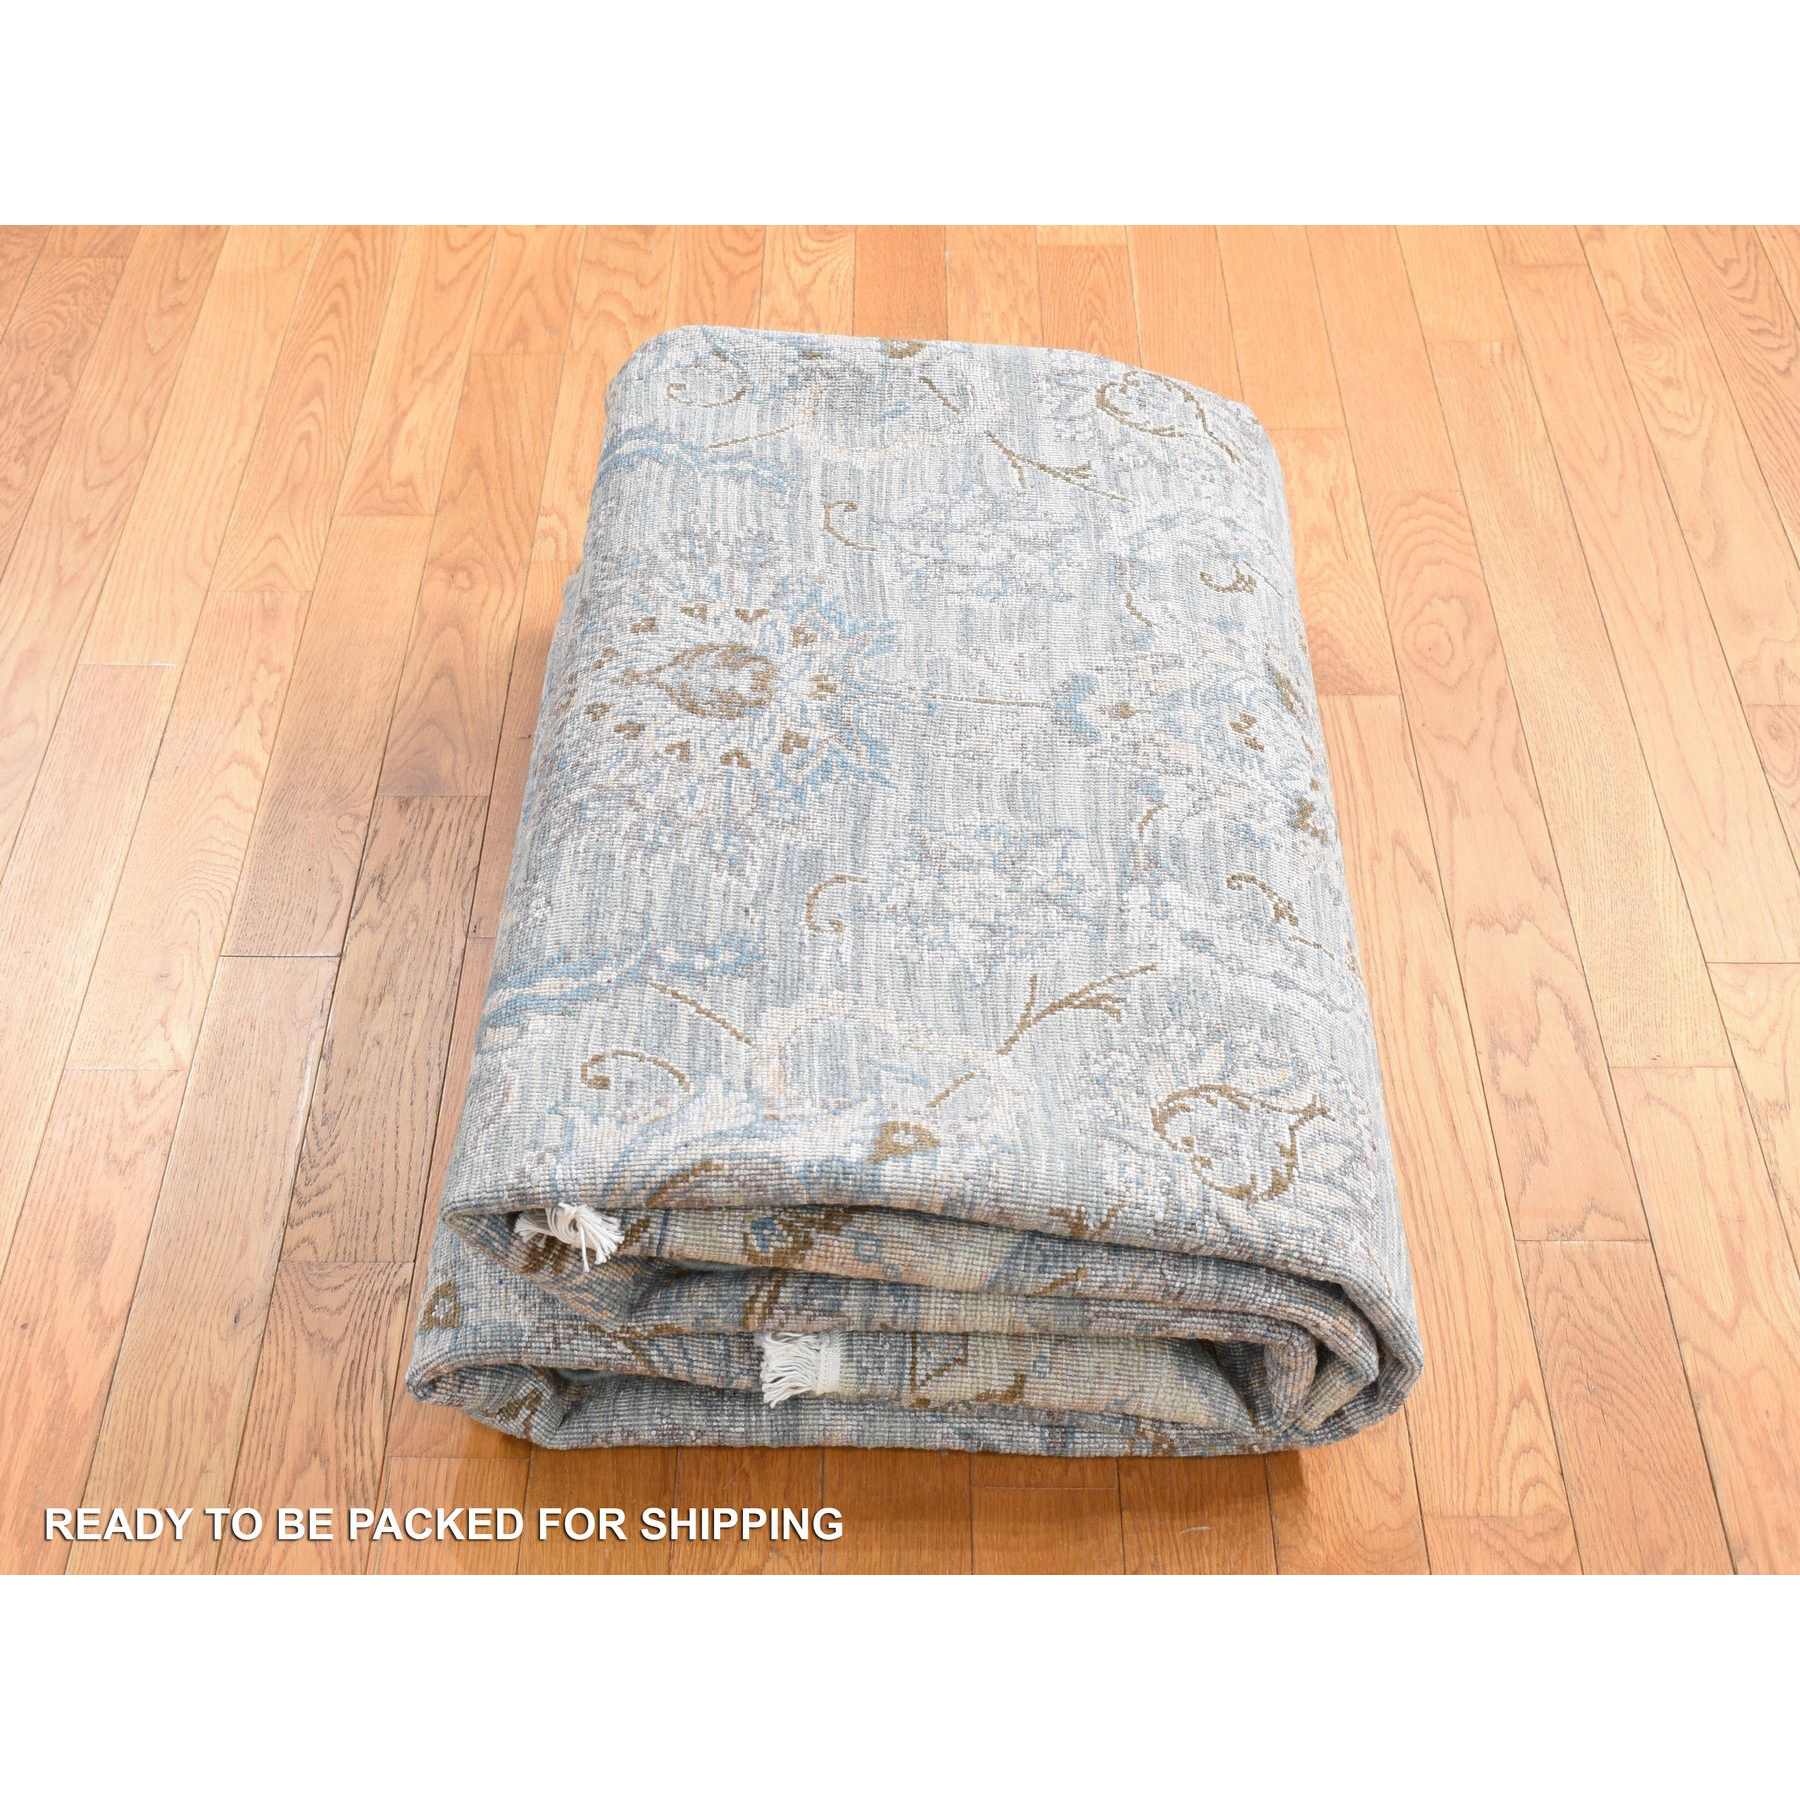 Transitional-Hand-Knotted-Rug-403695